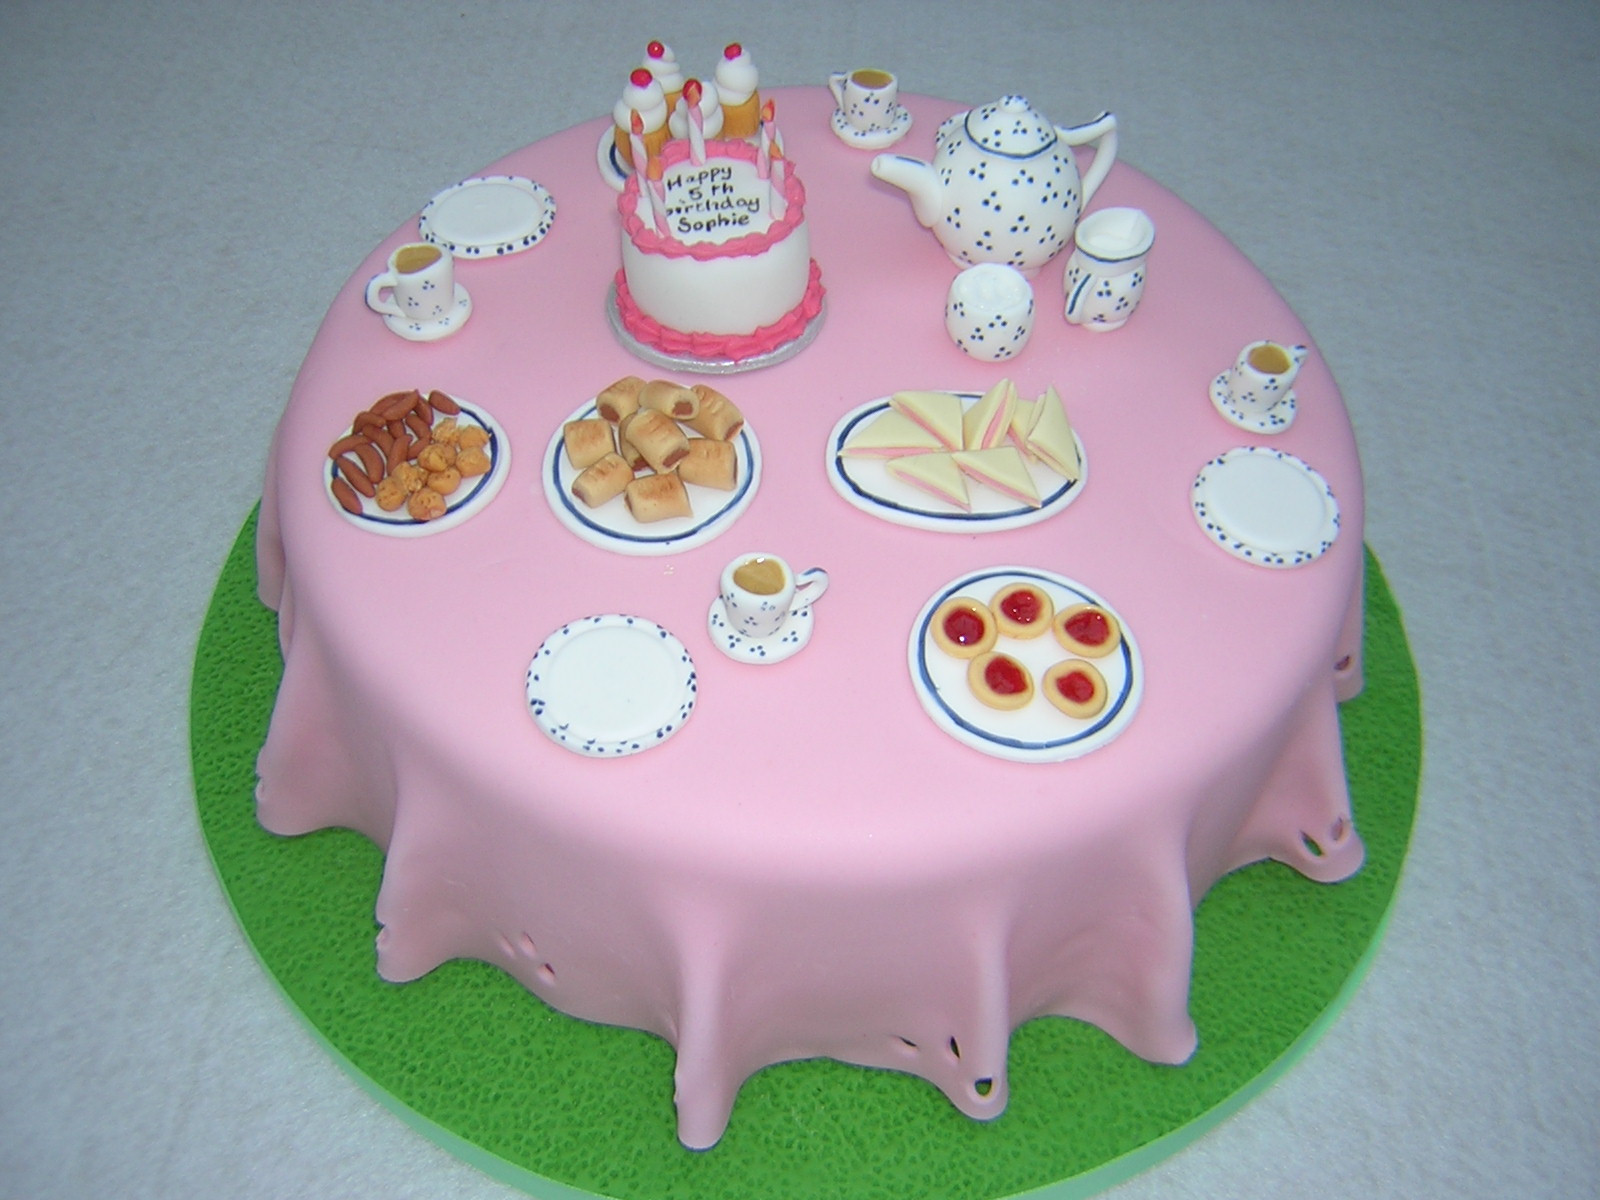 Tea Party Cake Ideas
 Learn How to Host a Tea Party Birthday for Your Kids and